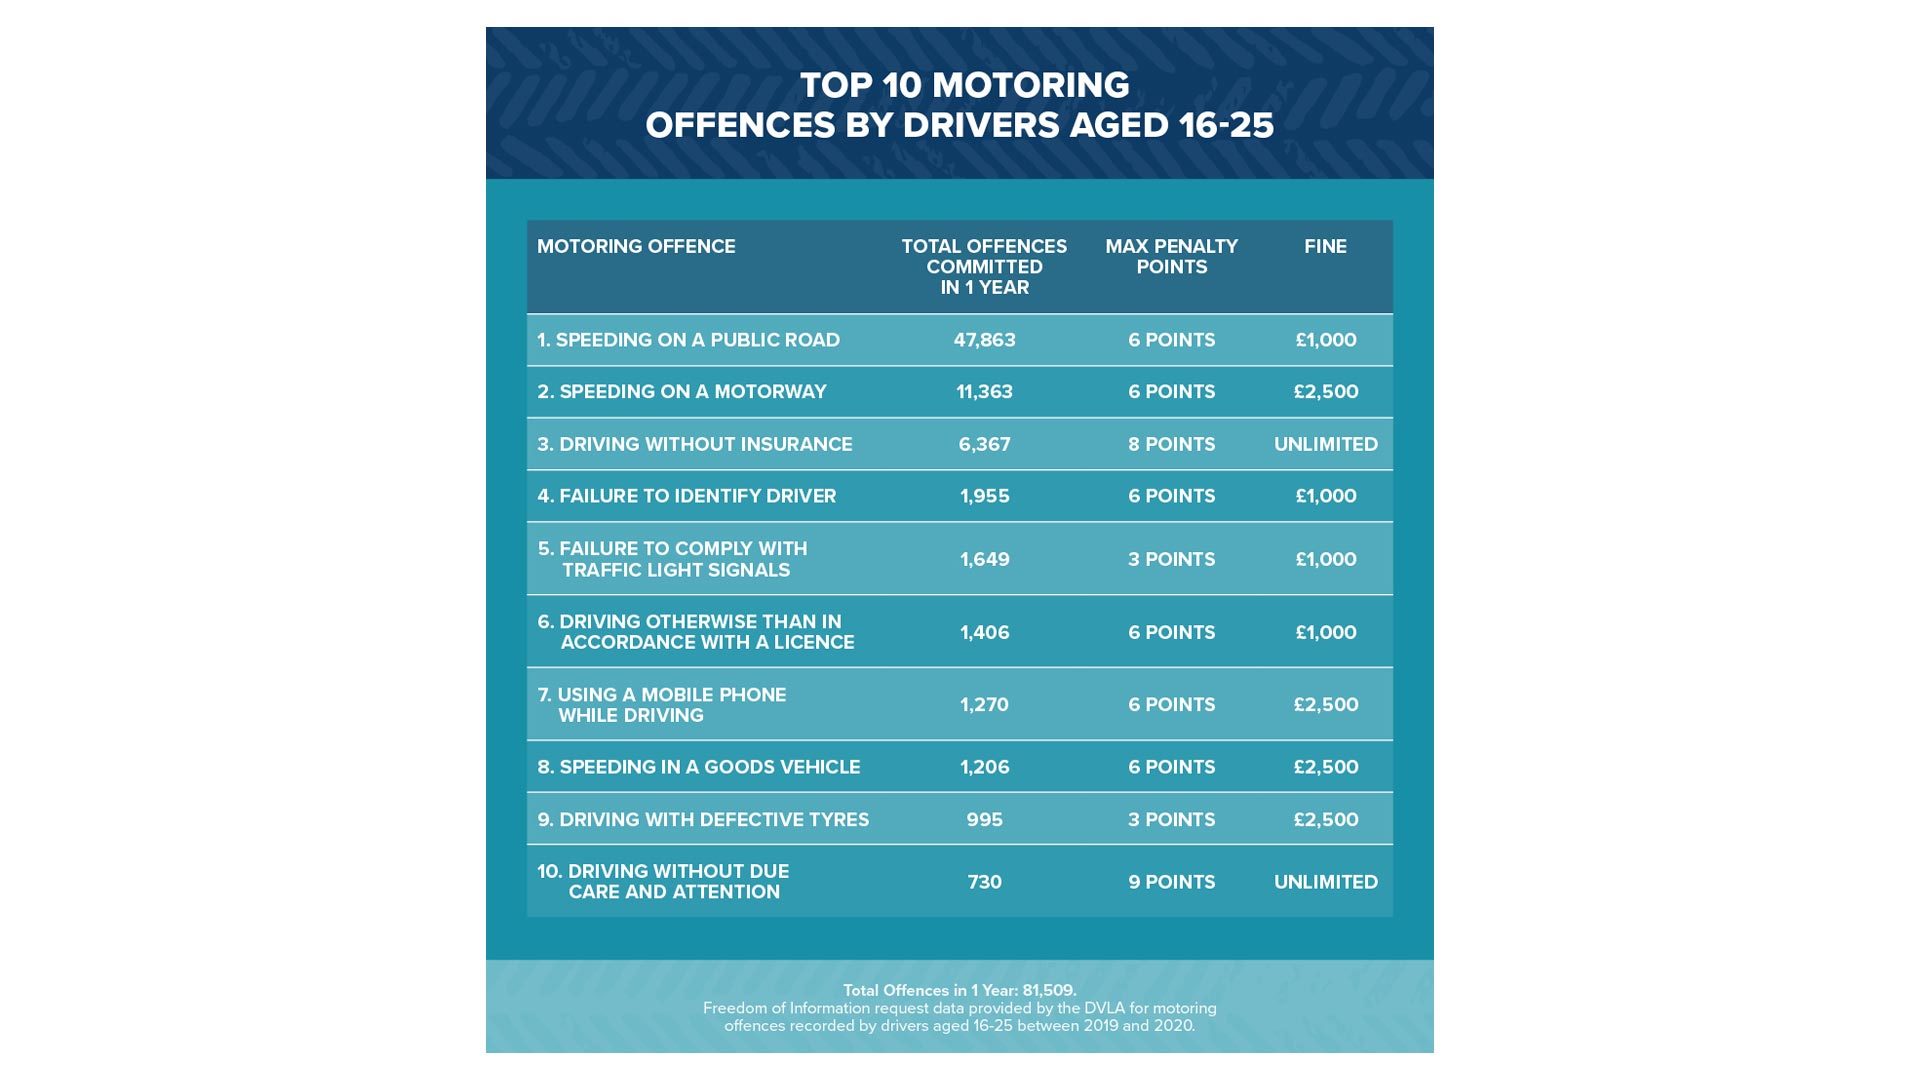 Top young driver motoring offences